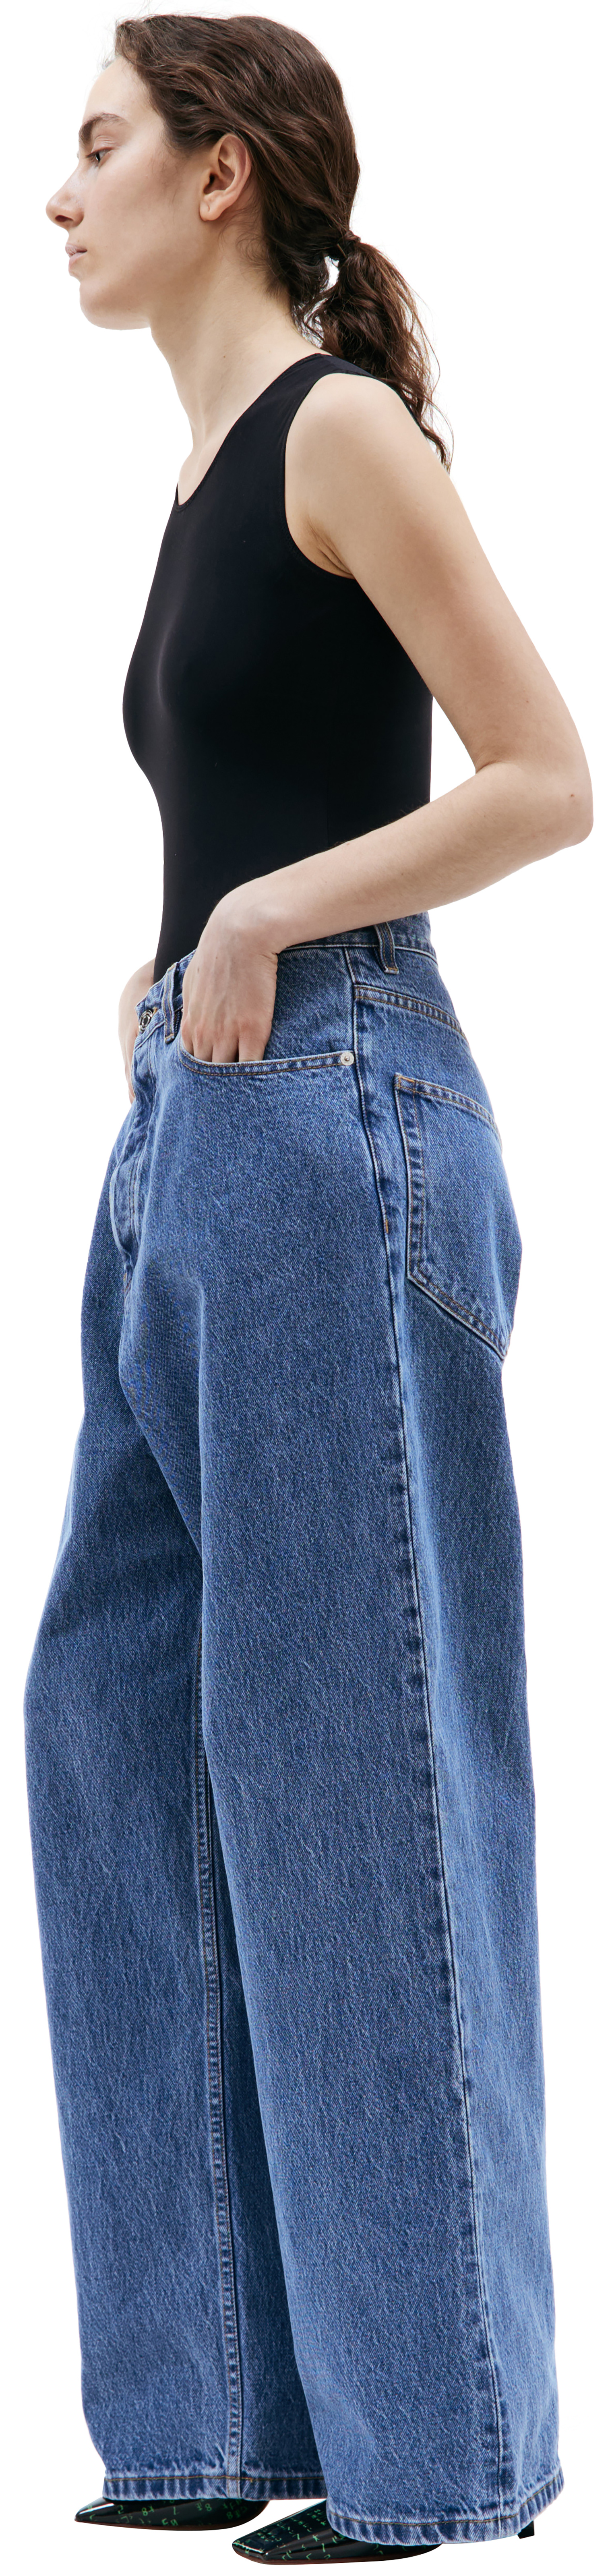 VTMNTS Wide straight jeans